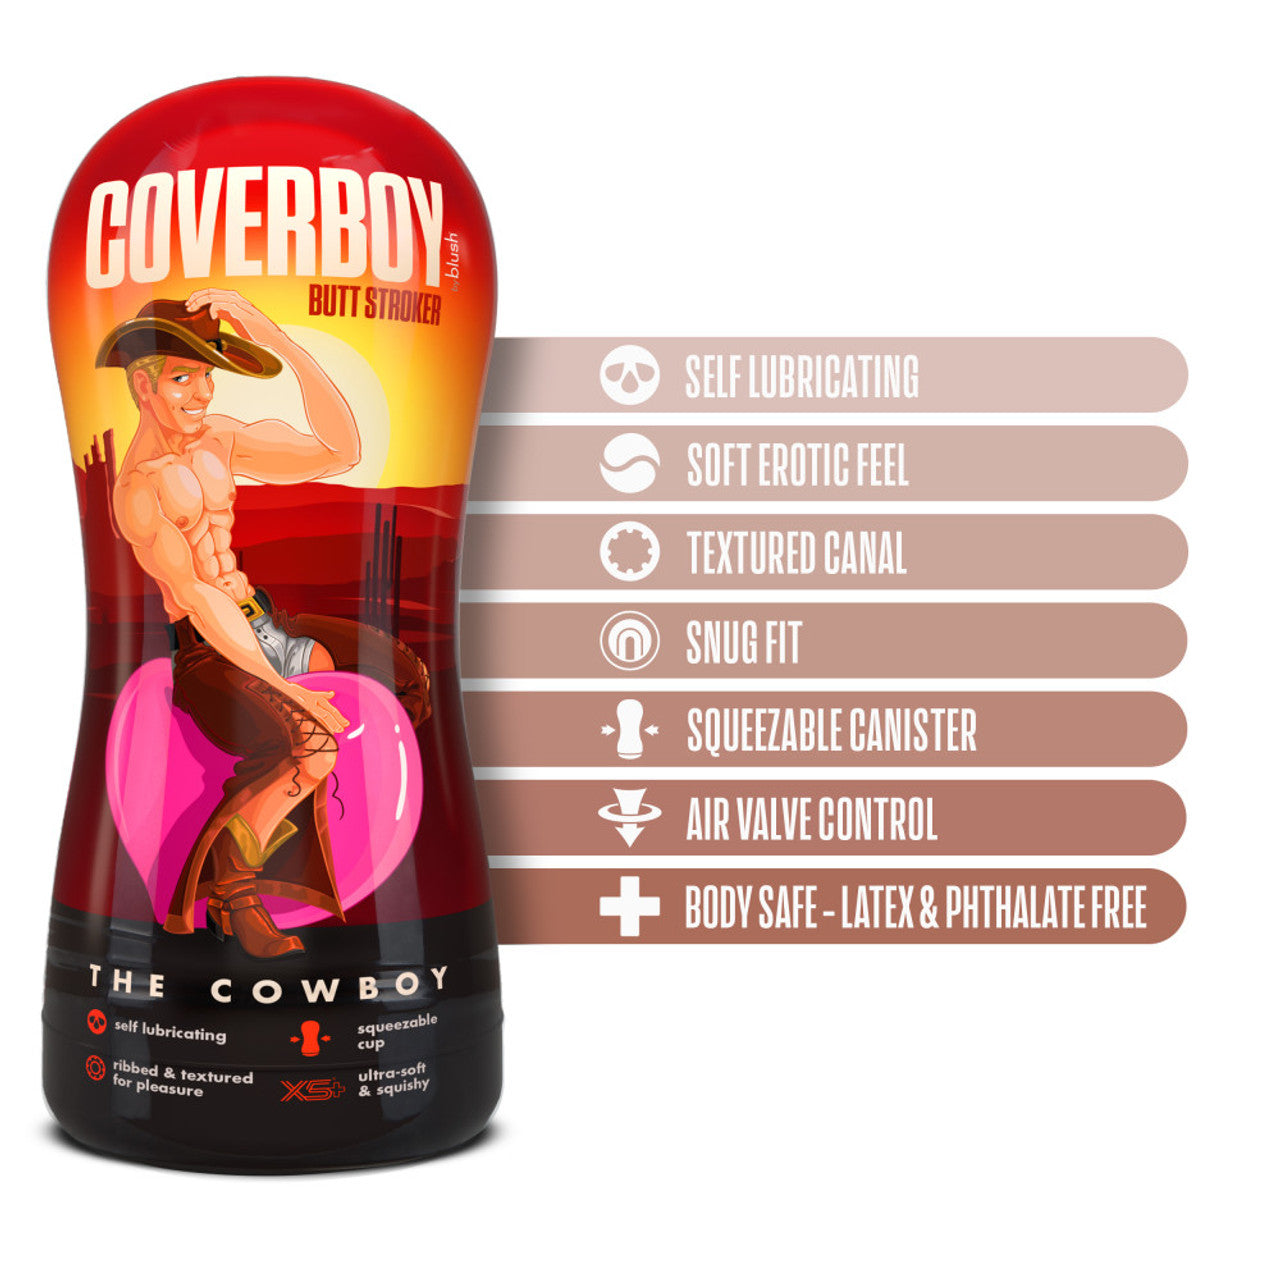 Coverboy Stroker - The Cowboy